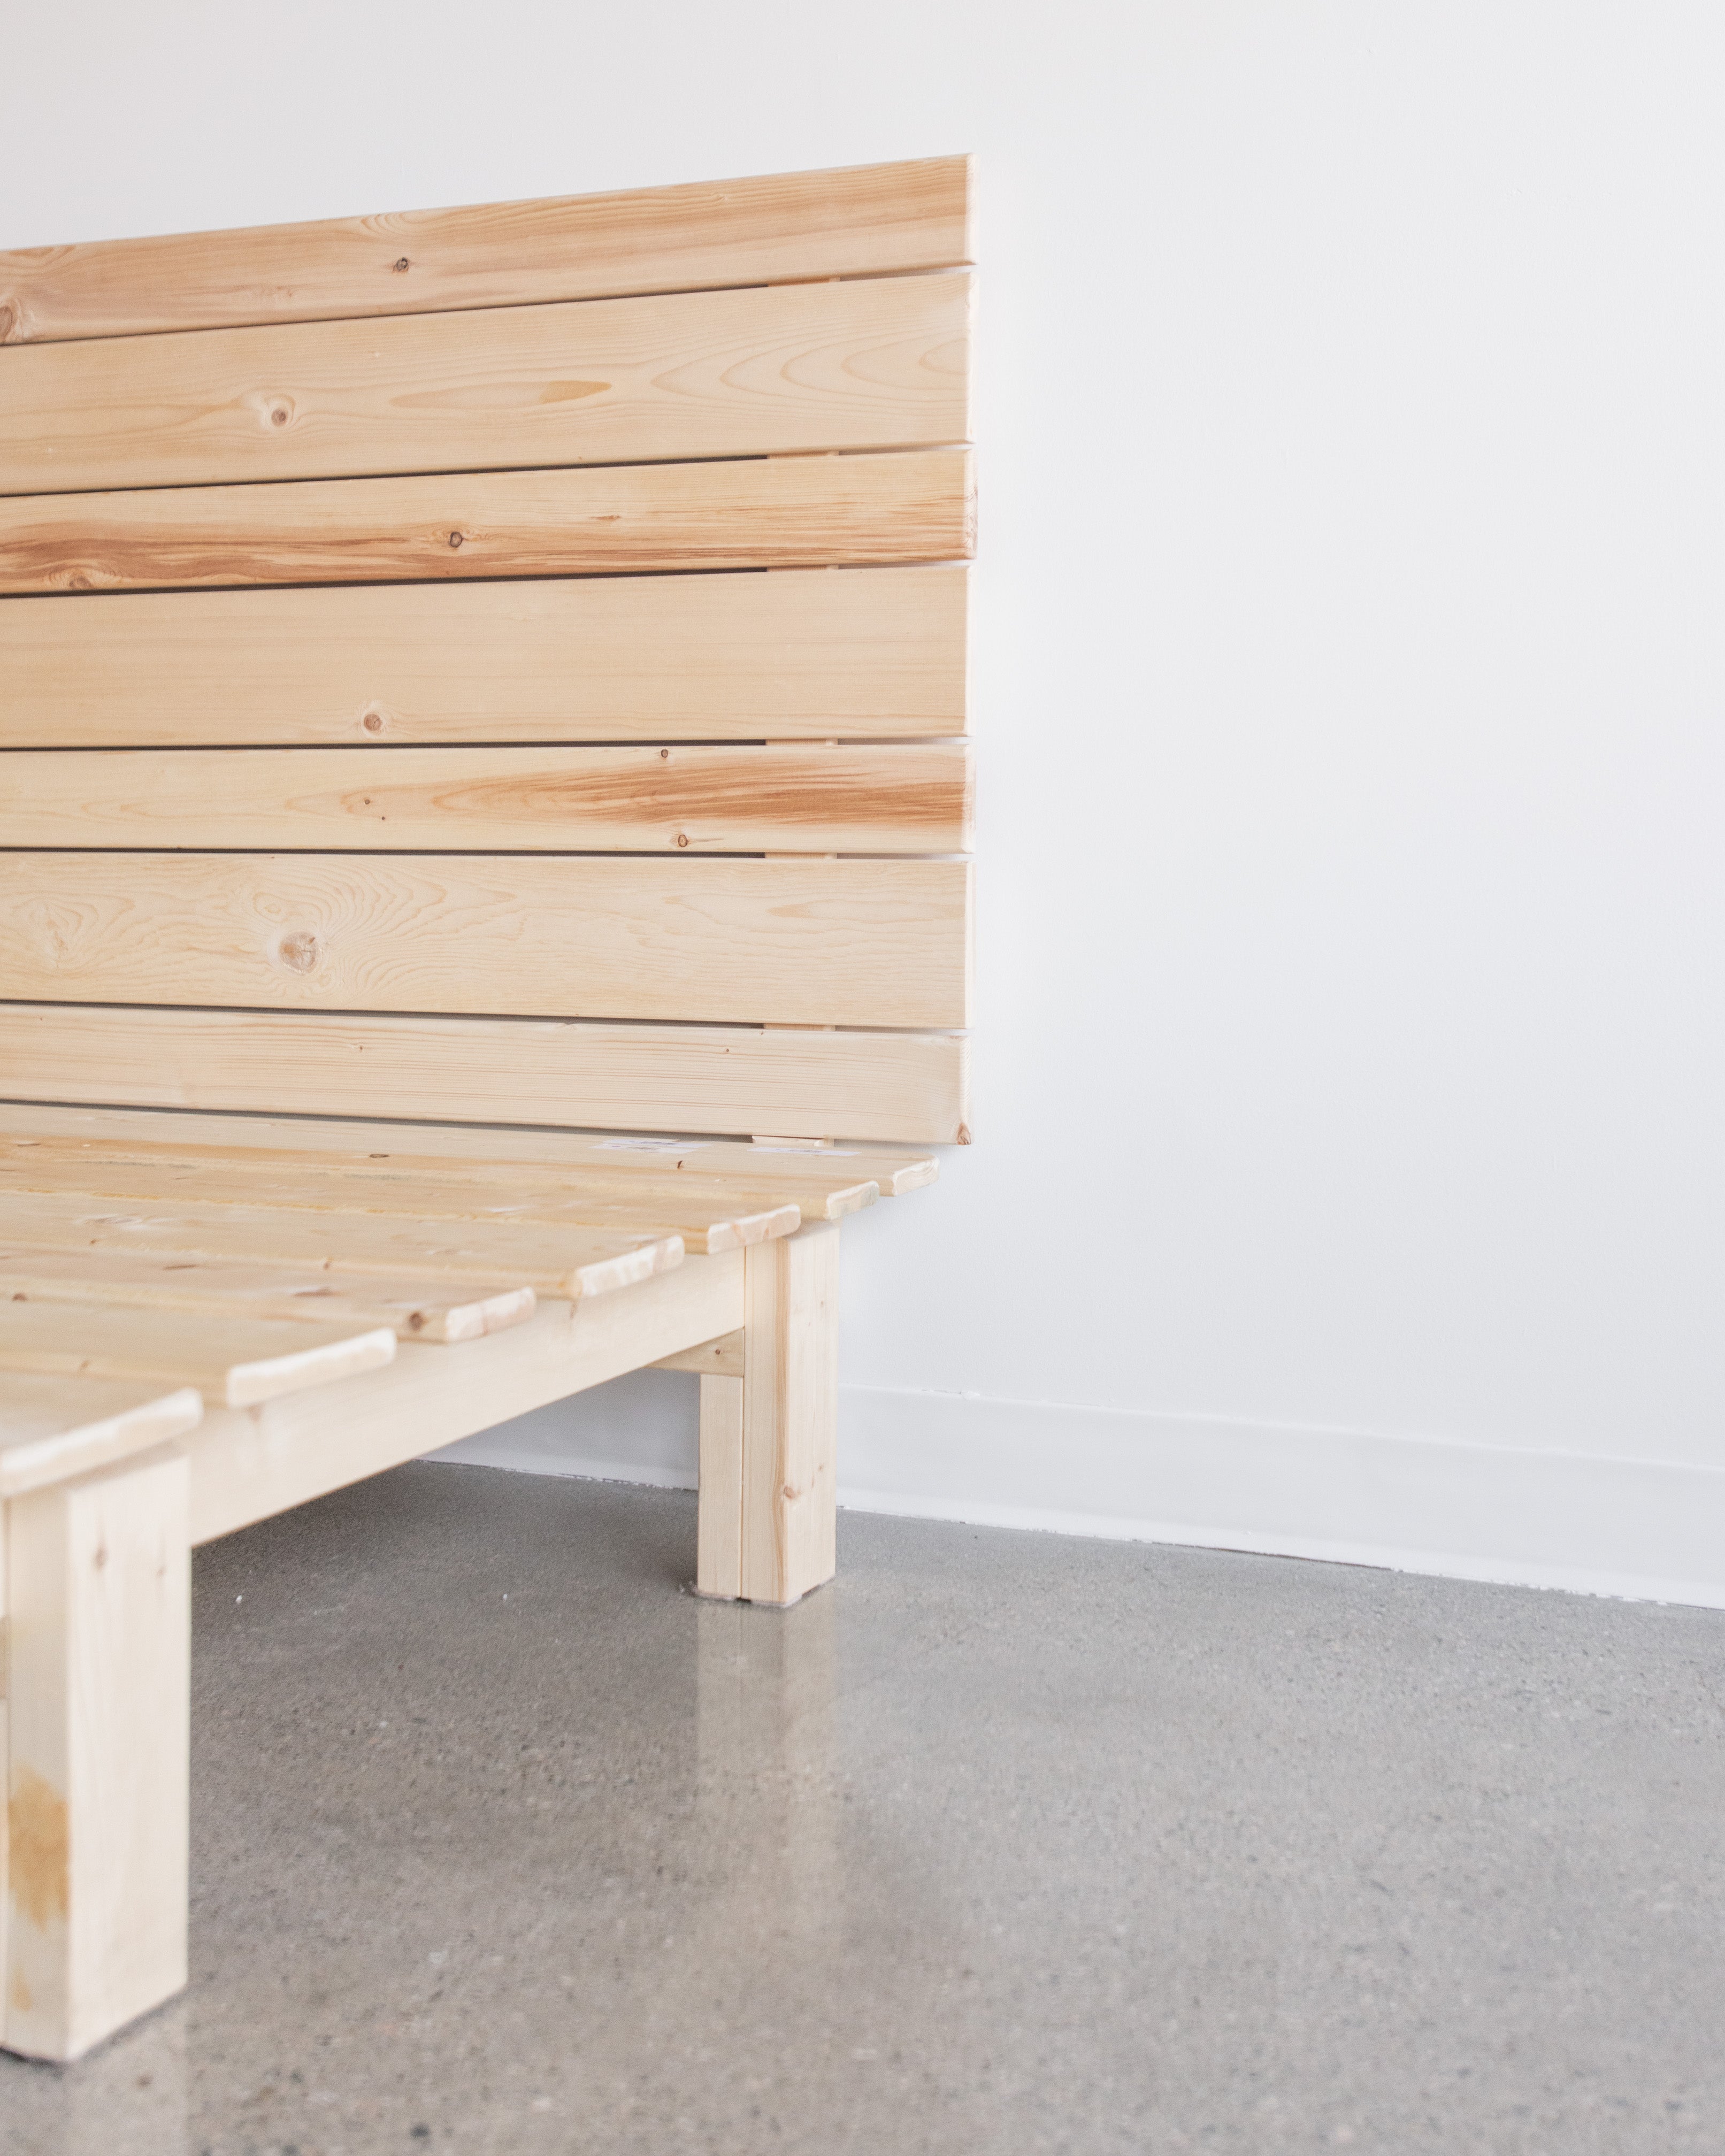 Magic Platform Bed Frame with natural wood slats spaced for optimized air flow and ventilation and a magic hedboard